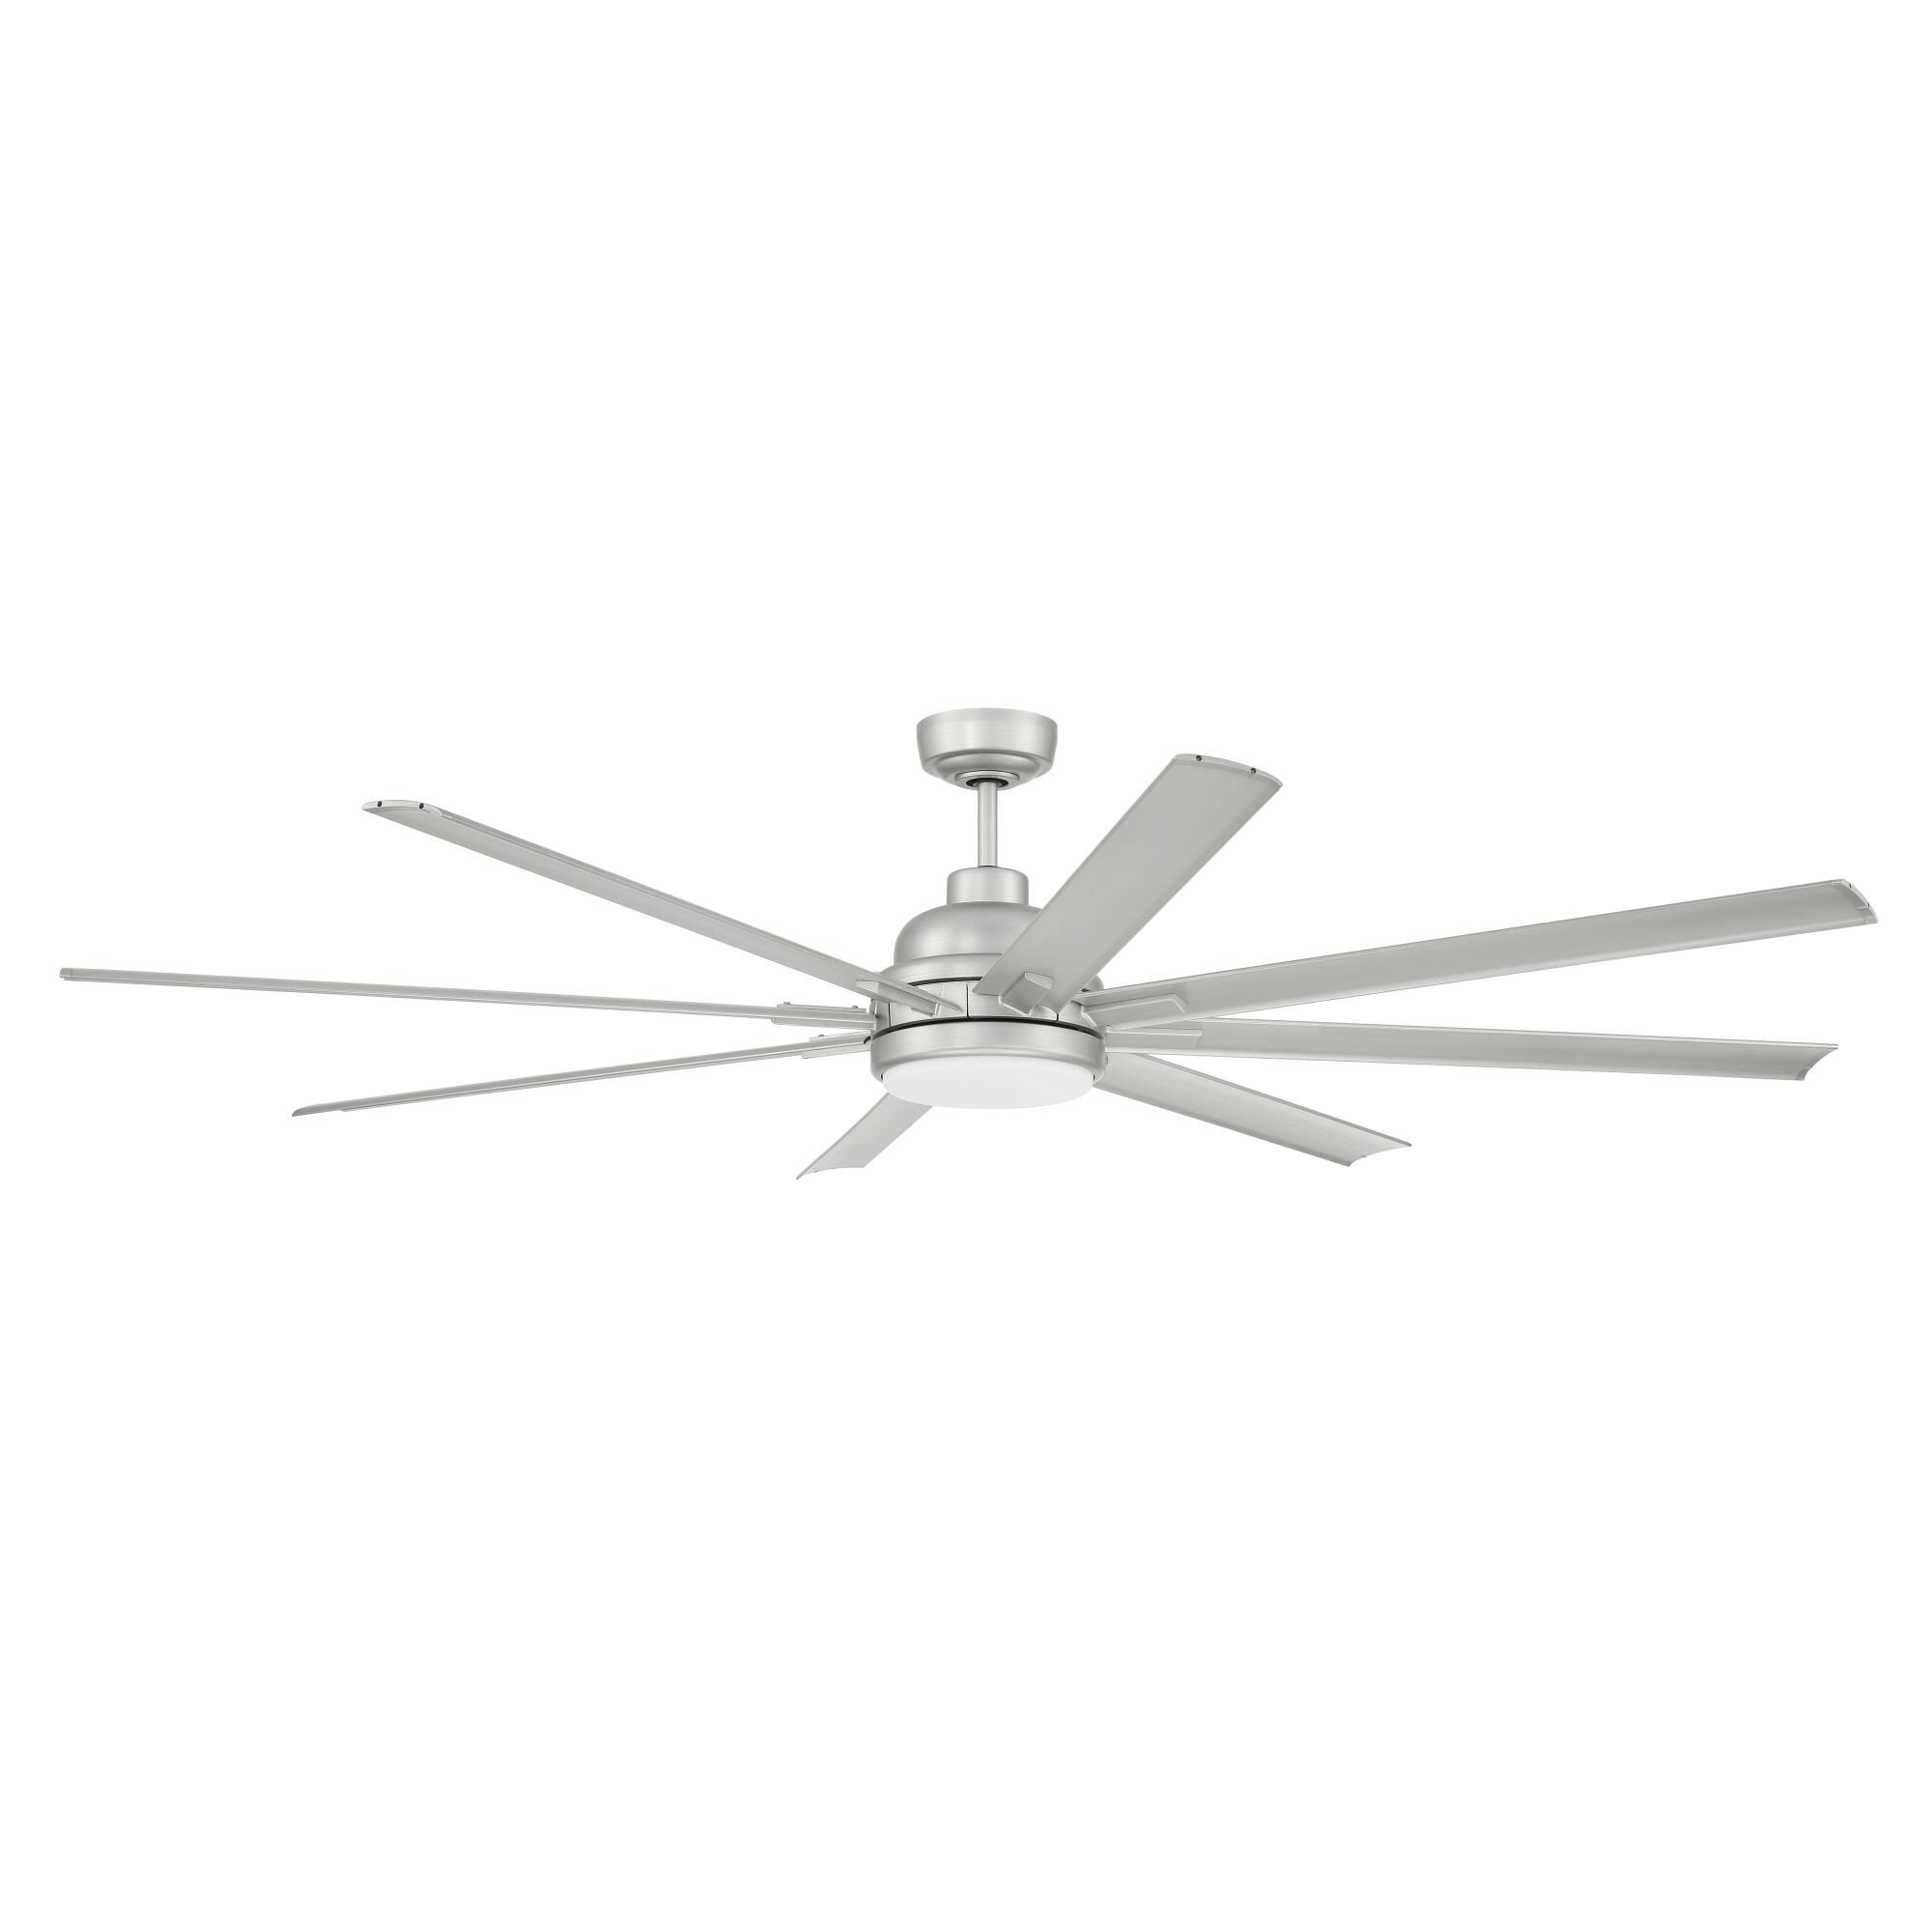 Photos - Fan Craftmade Rush Outdoor Rated 72 Inch Ceiling  Rush - RSH72PN8 - Modern